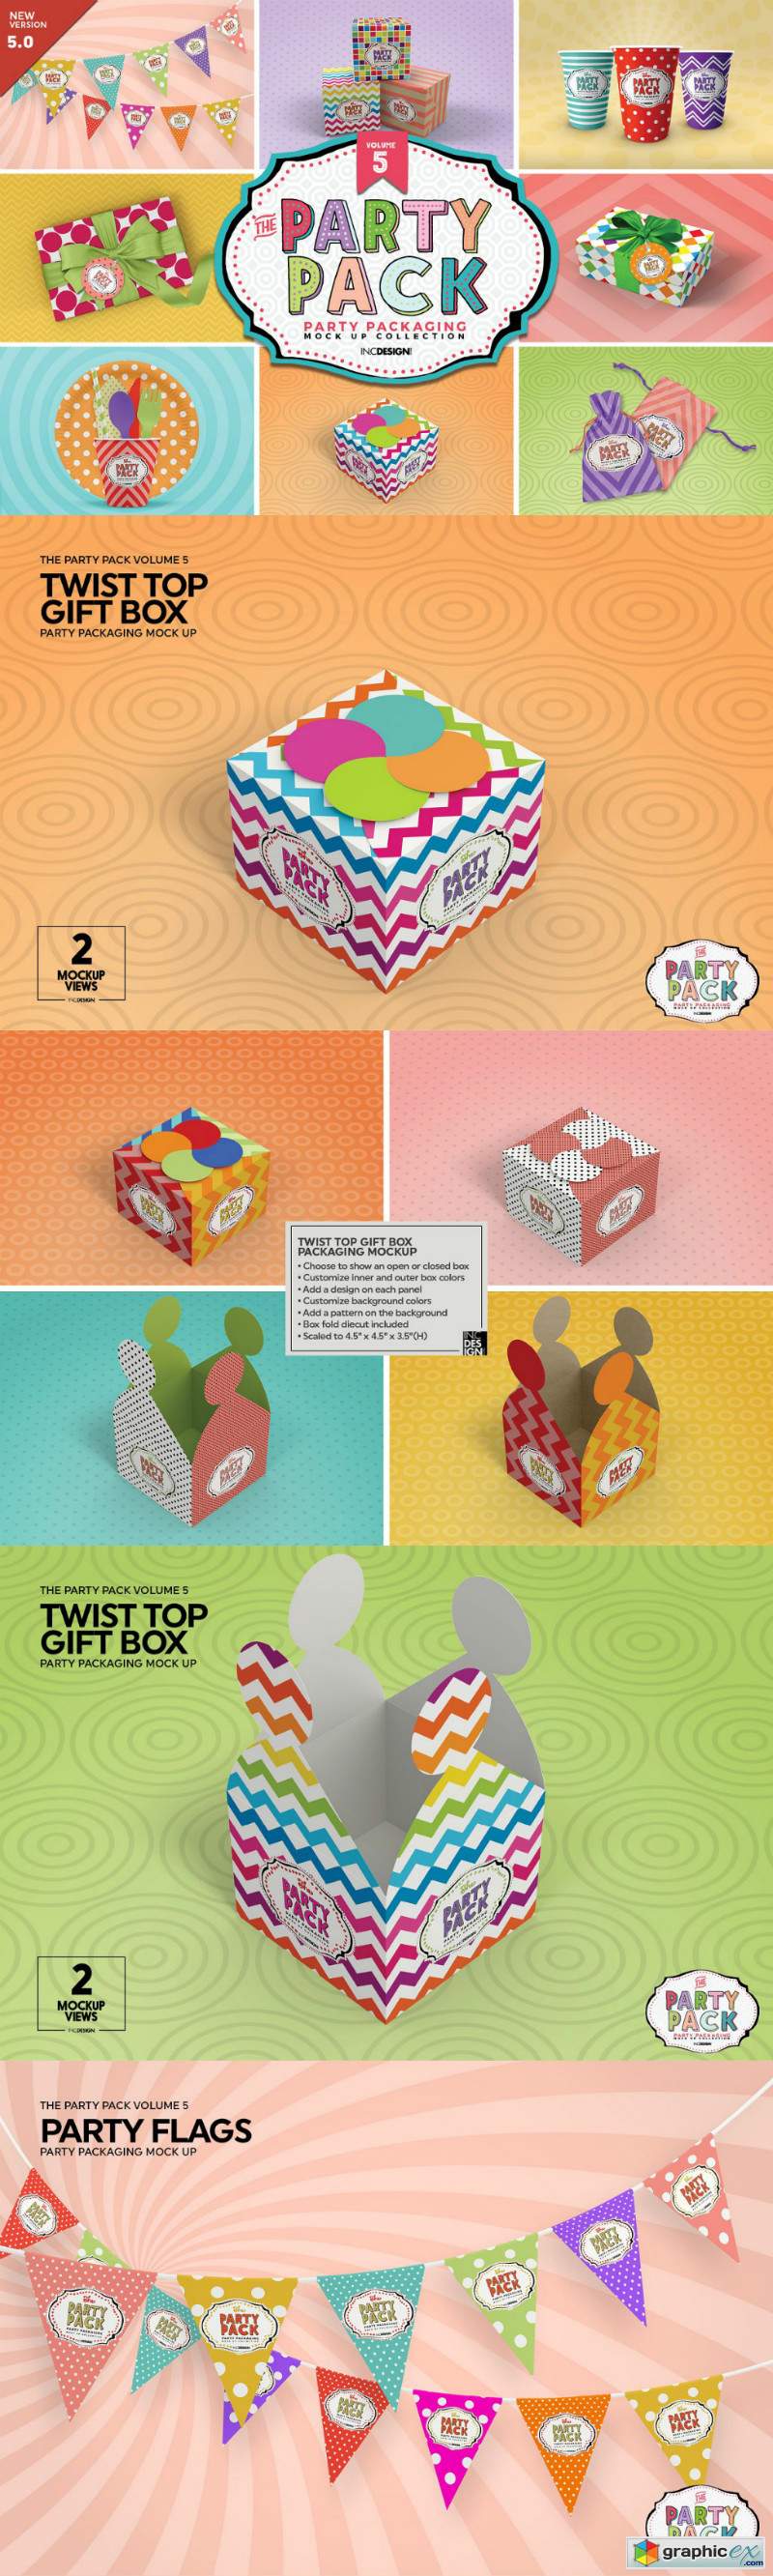 Vol.5 Party Packaging MockUps